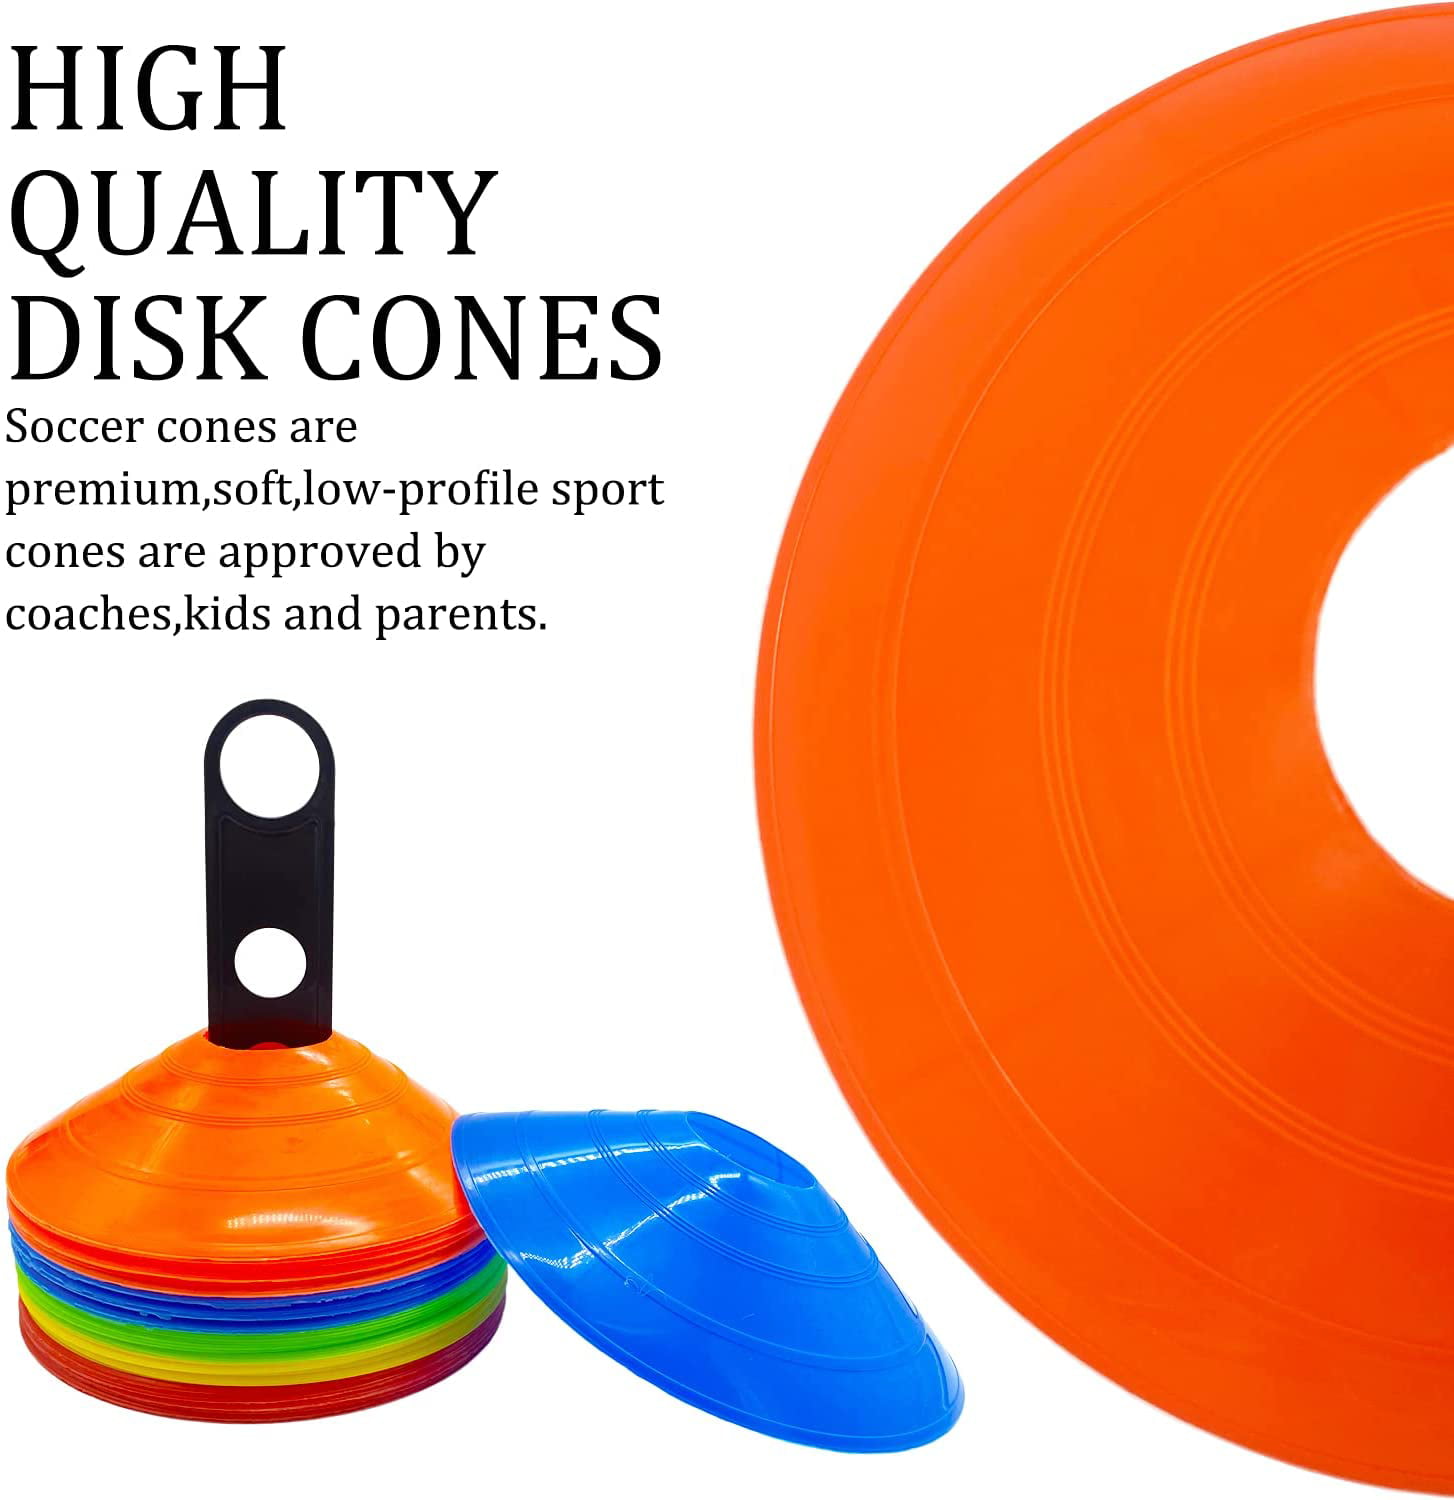 Soccer Disc Cones for Drills Set of 20/50 Pro Disc Cones Agility Training Sport Cones for Soccer Practice Football Basketball Kids Field Marker Cones Round Cones with Strap/Holder and Mesh Bag 